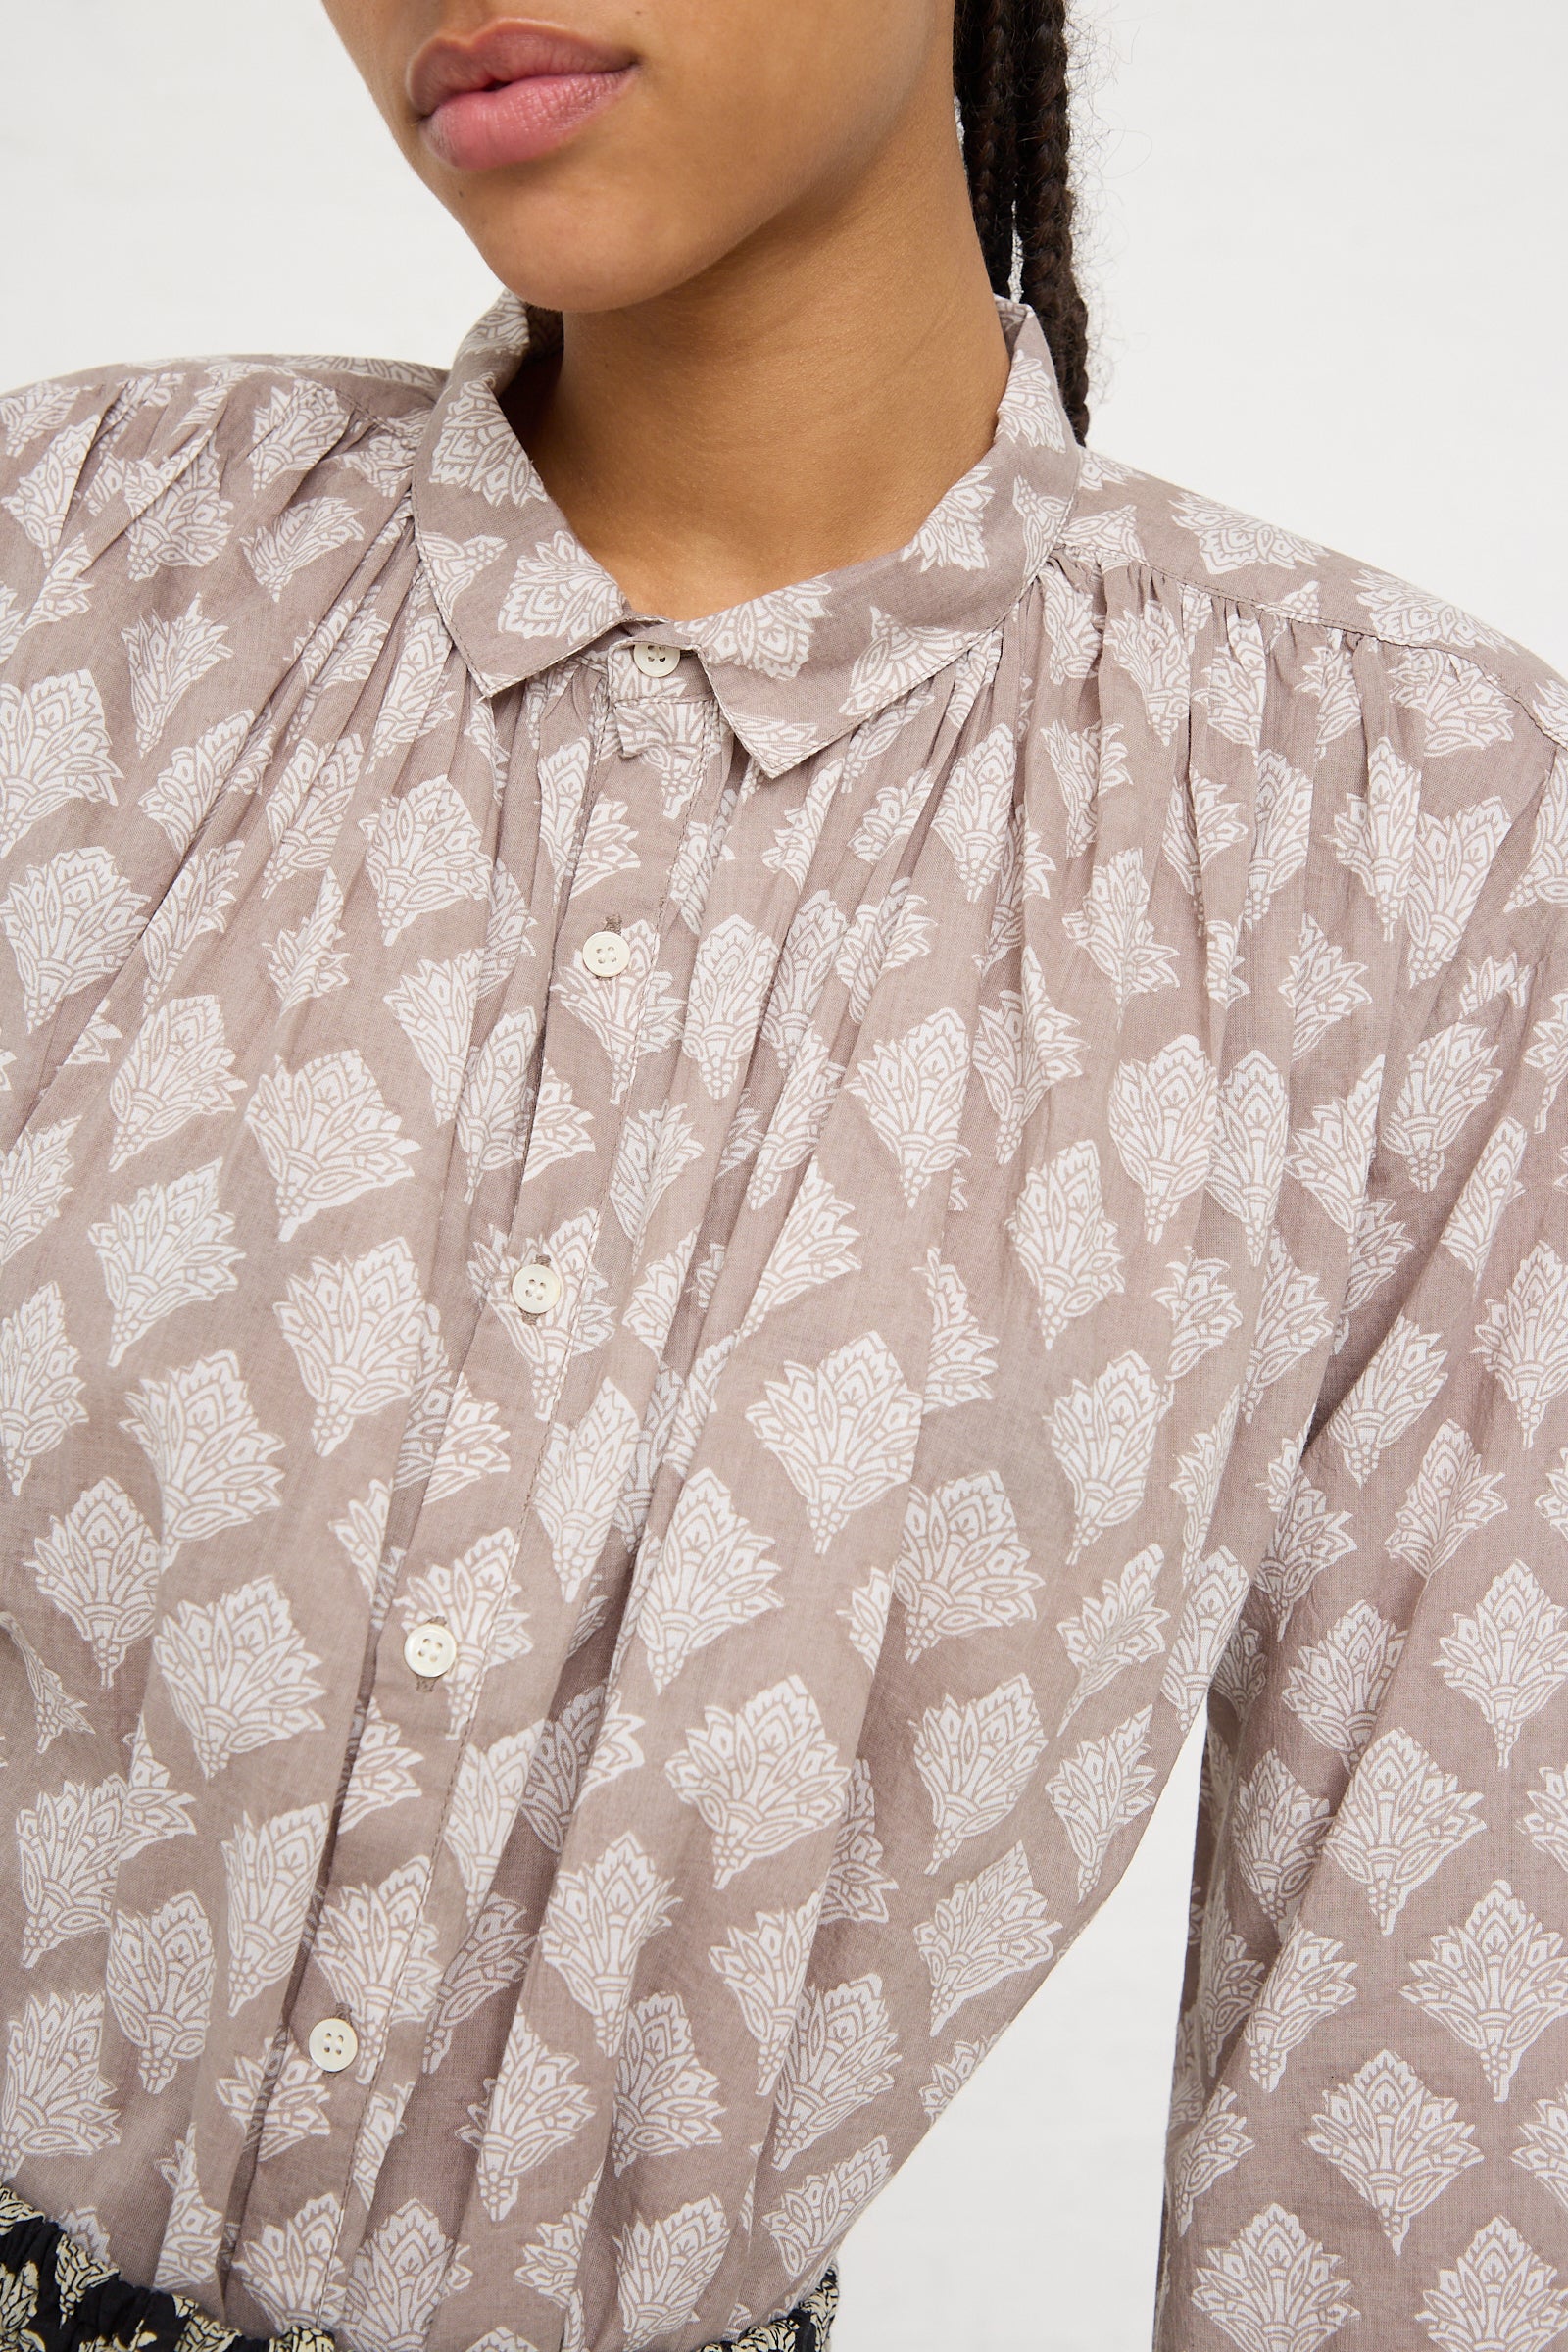 Close-up of a woman wearing an Ichi Antiquités Woven Cotton Indian Block Print Shirt in Beige with a focus on the collar and button details.